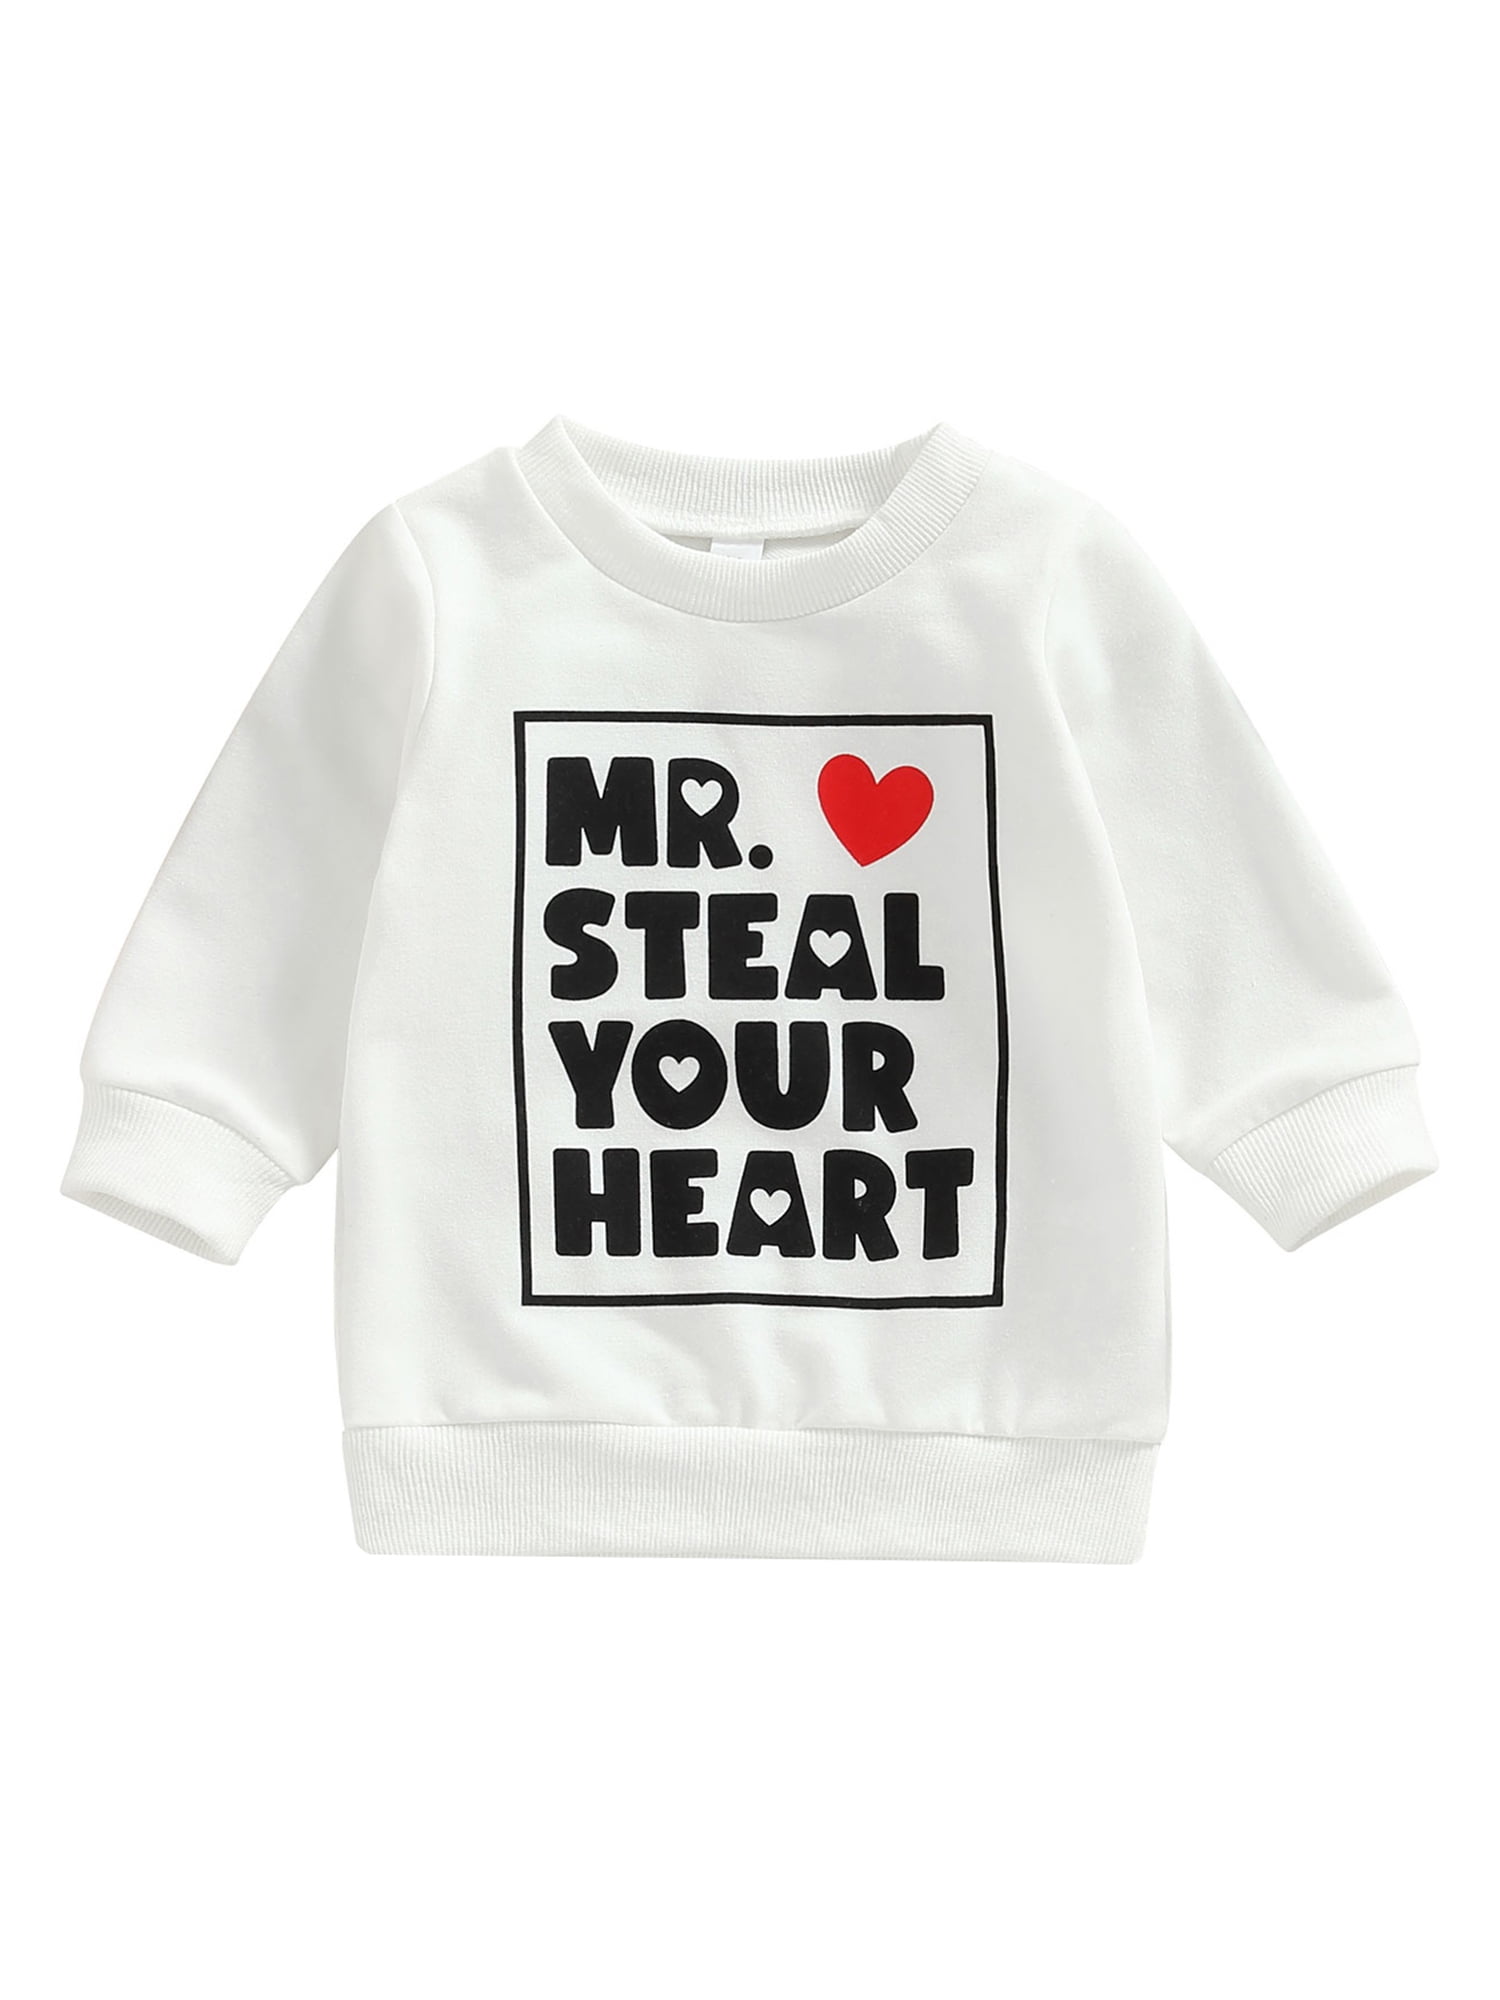 Aunavey Toddler Baby Boys Girls Valentine's Day Sweatshirt MR. Steal Your  Heart Pullover Spring Clothes Top